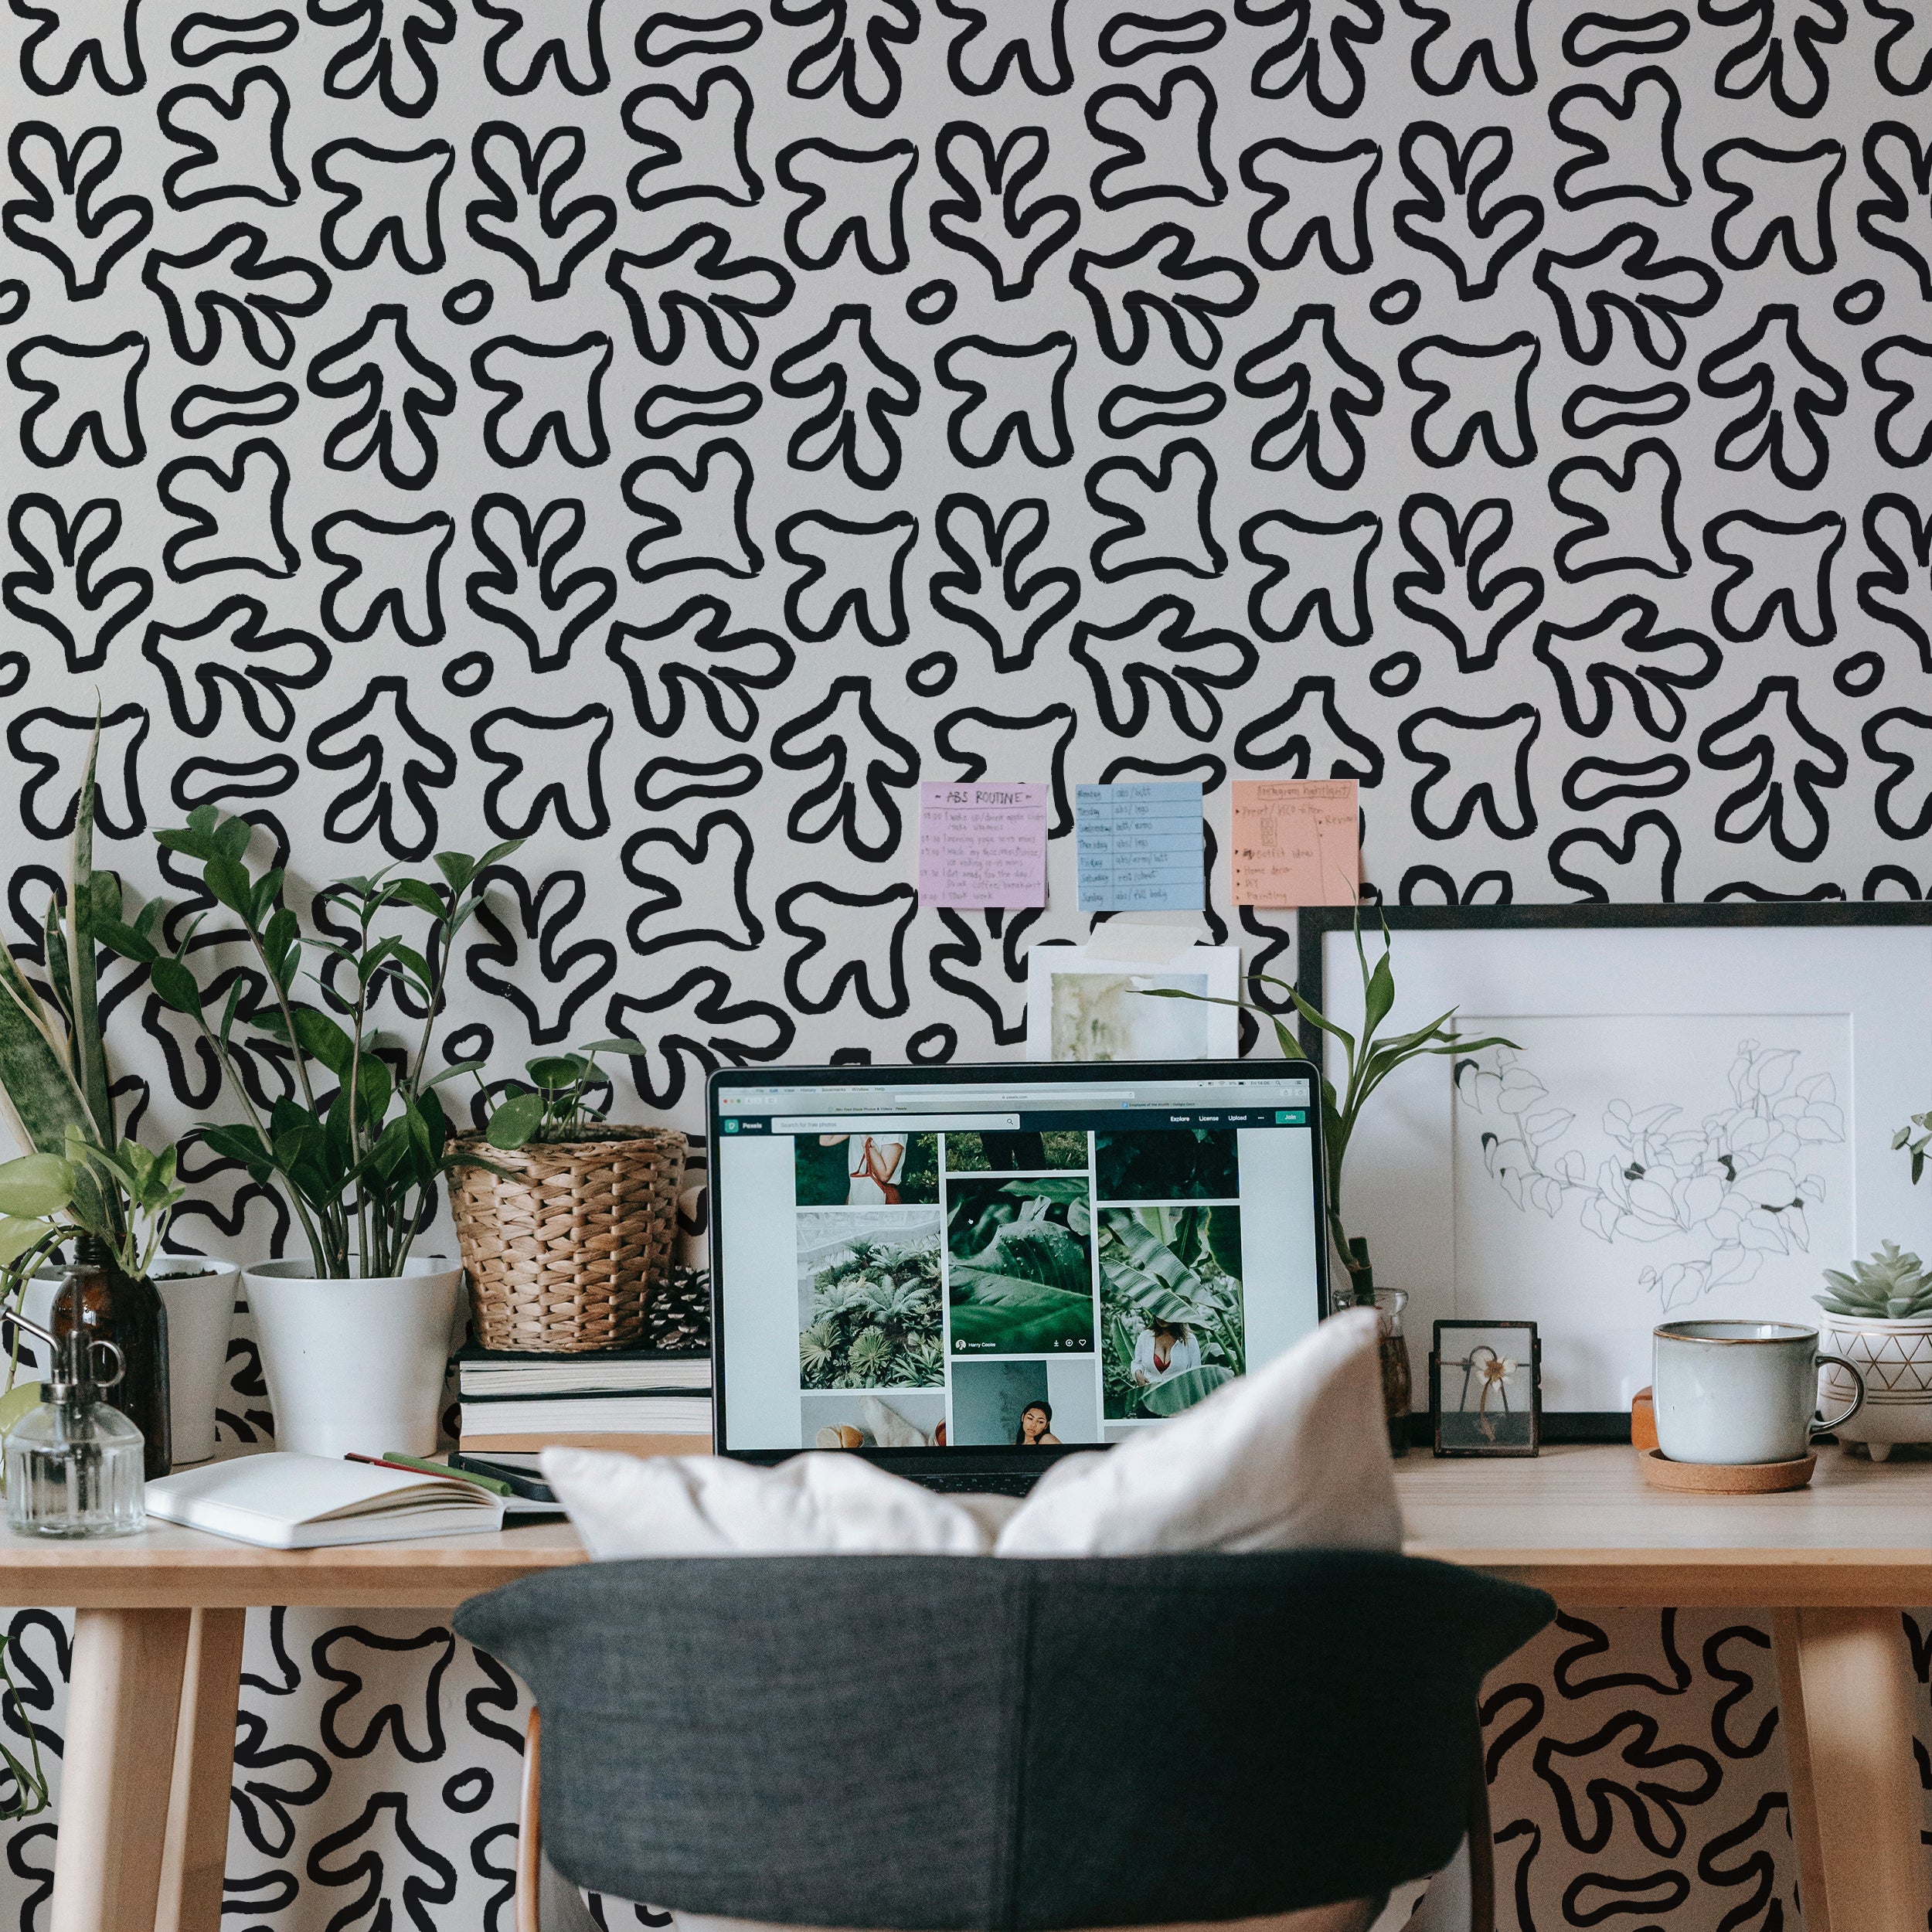 A home office setup showcasing the Bohemian Abstract Wallpaper. The walls are adorned with black organic shapes on a beige backdrop, creating a lively and creative space. The desk area is neatly organized with a computer, books, and green plants, enhancing the room's bohemian vibe.